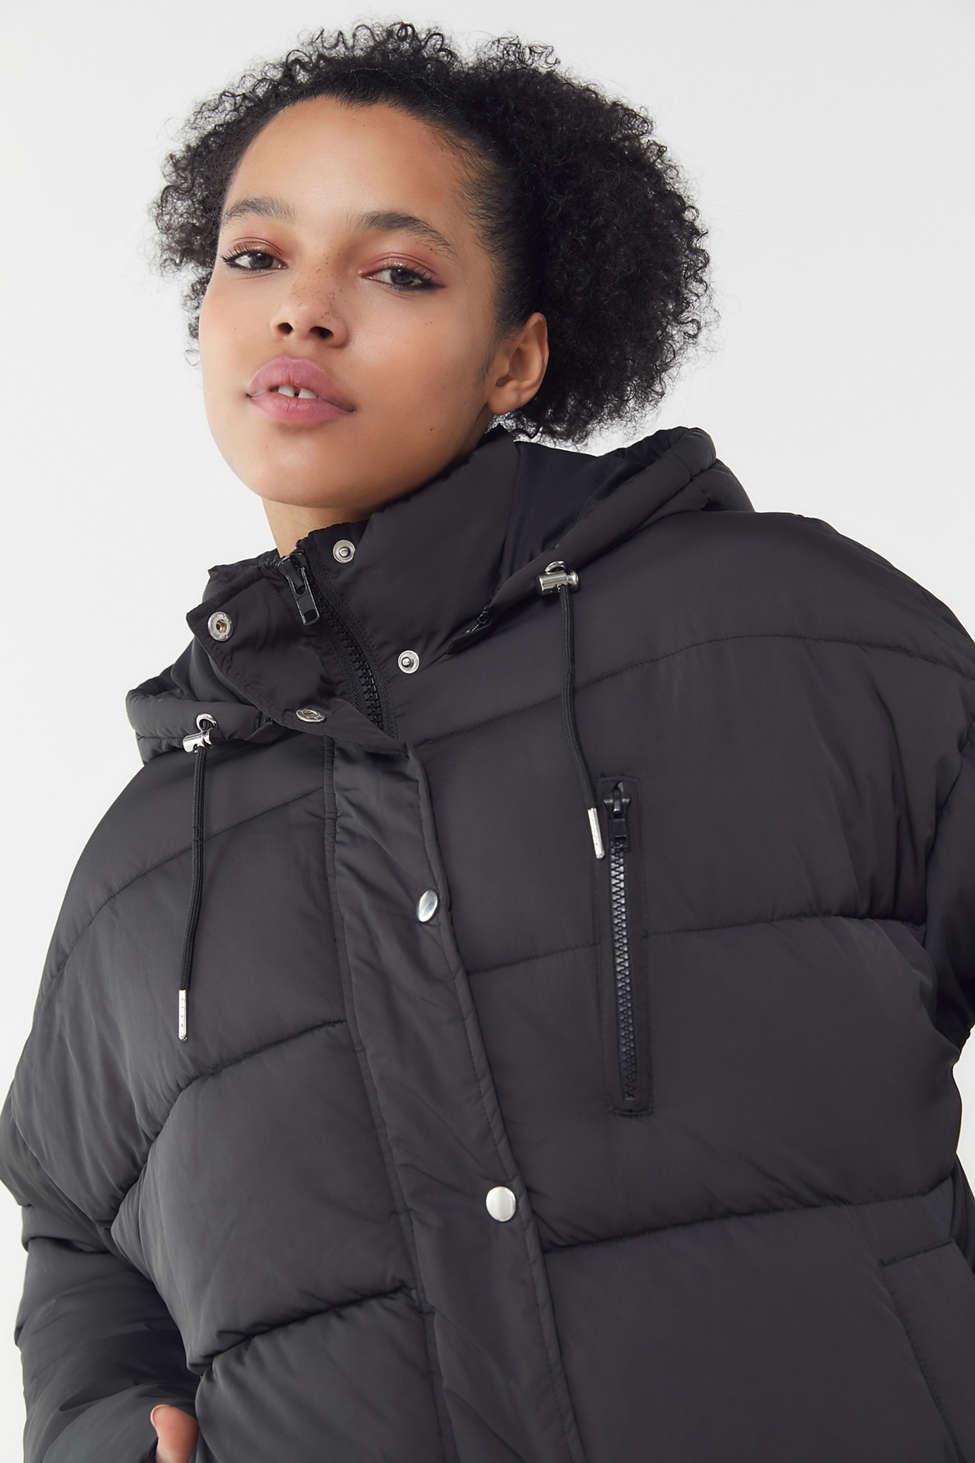 Urban Outfitters Black Puffer Coat on Sale, SAVE 34% -  www.fourwoodcapital.com